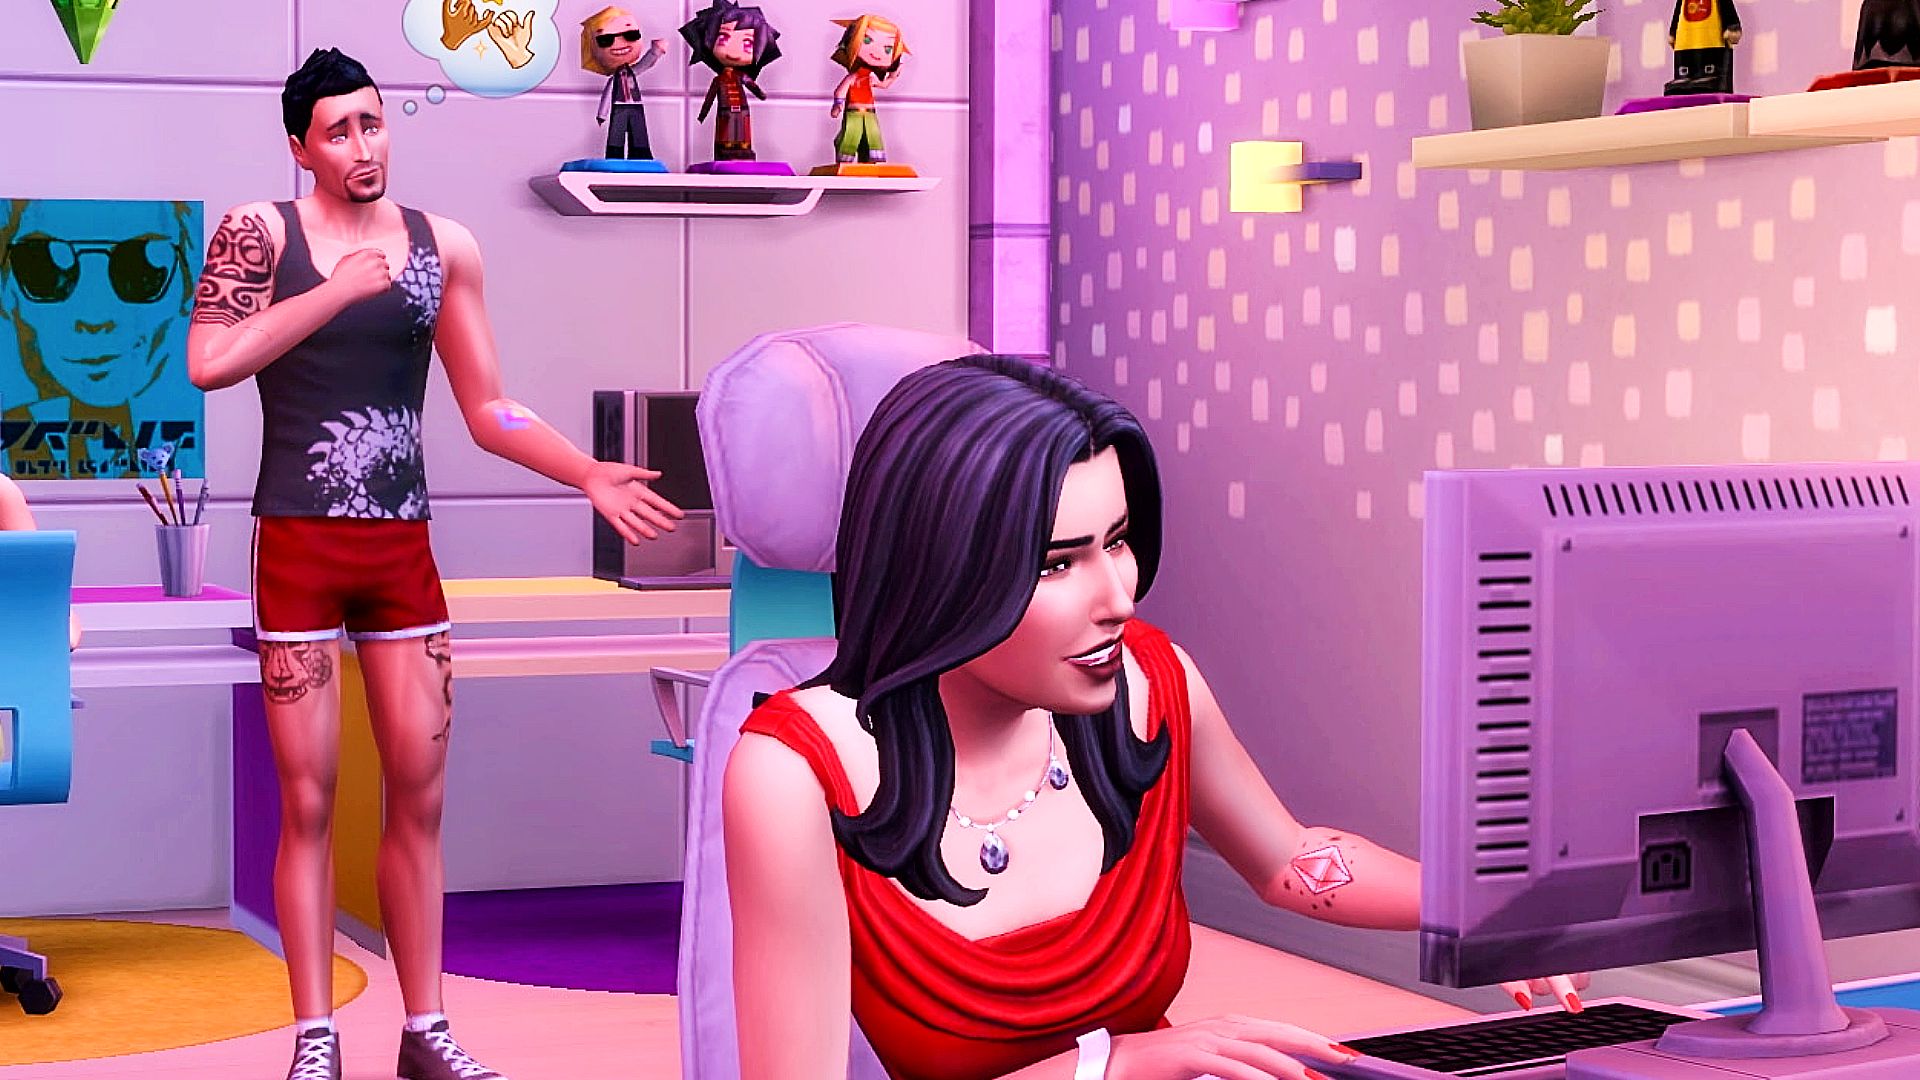 The Sims 5 listed to release in 2021 - Rachybop